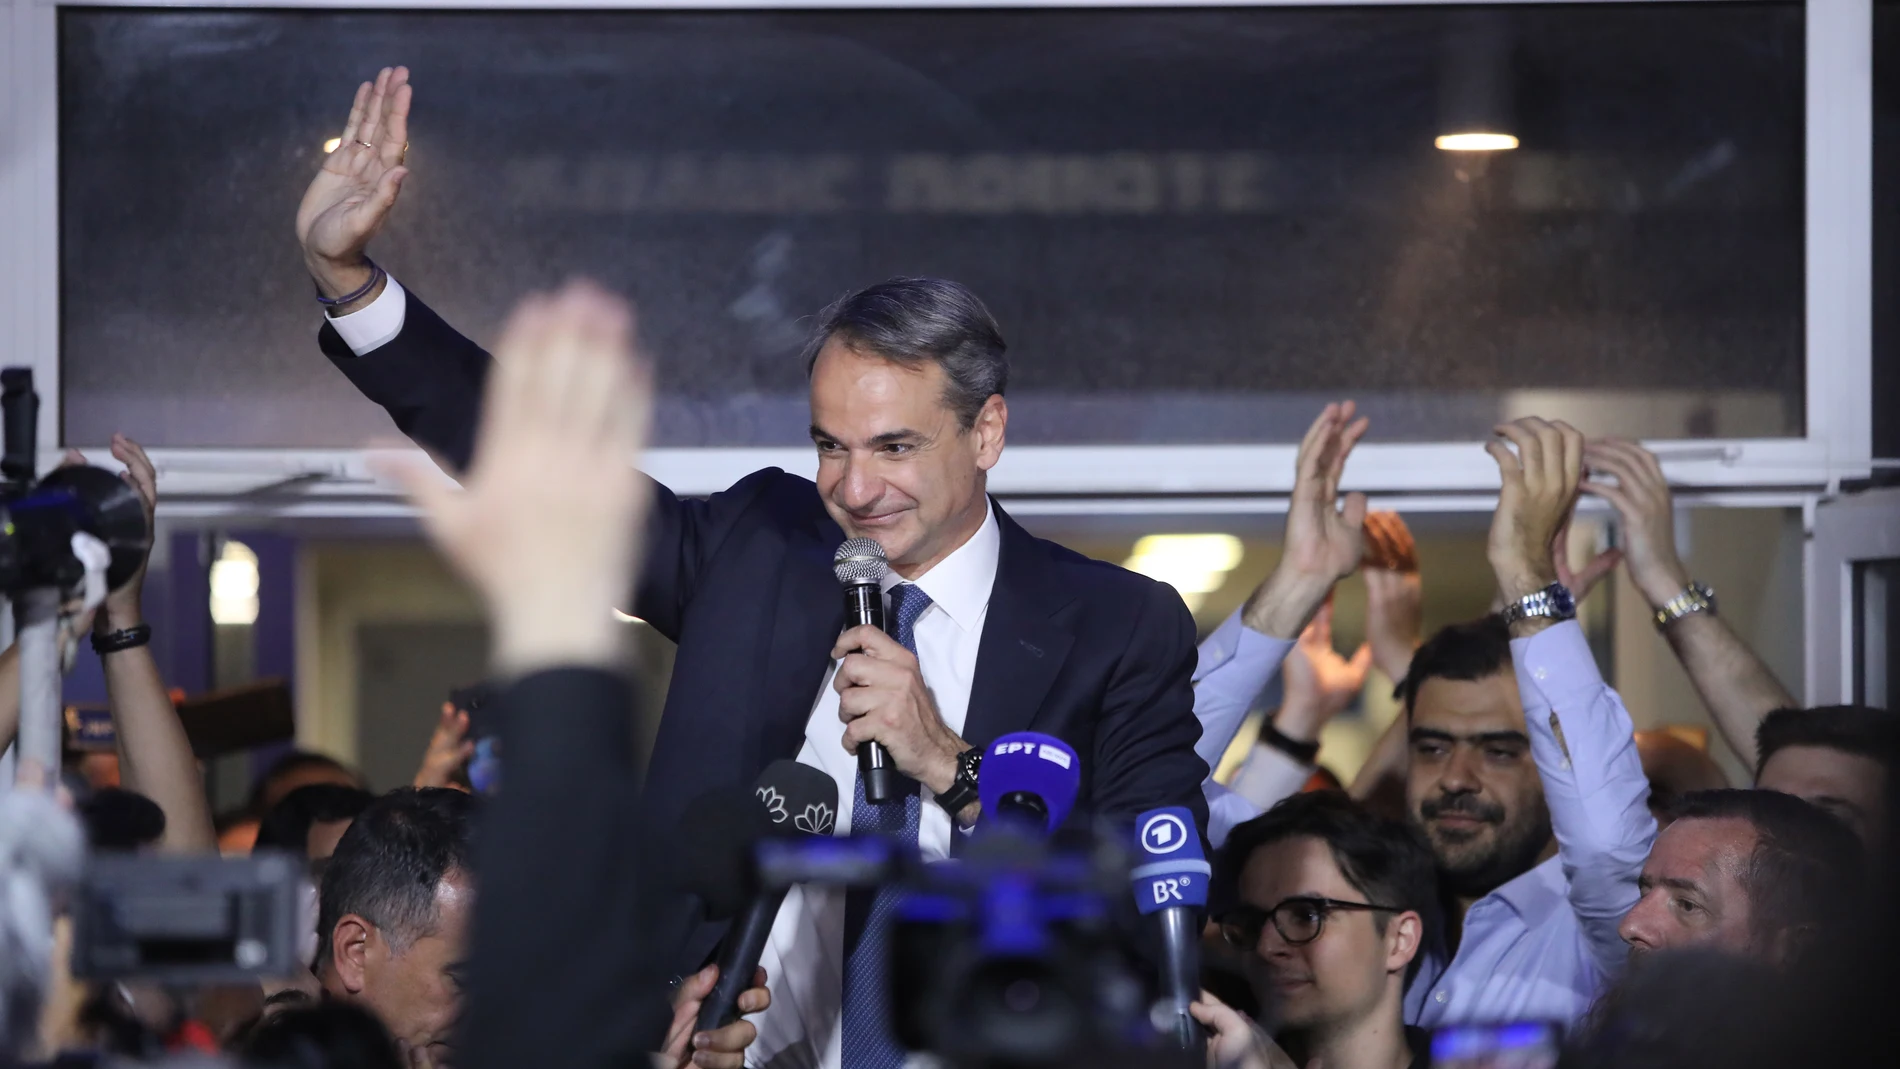 Athens (Greece), 21/05/2023.- Greek Prime Minister and leader of New Democracy political party, Kyriakos Mitsotakis, greets supporters after the announcement of the first results of the Greek general elections, at the headquarter's party, in Athens, 21 May 2023. The joint exit poll of nationwide television stations in Greece showed a comfortable lead of ruling New Democracy party during national elections on Sunday, after polls shut down at 7:00 p.m. (Elecciones, Grecia, Atenas) EFE/EPA/GEORGE VITSARAS 